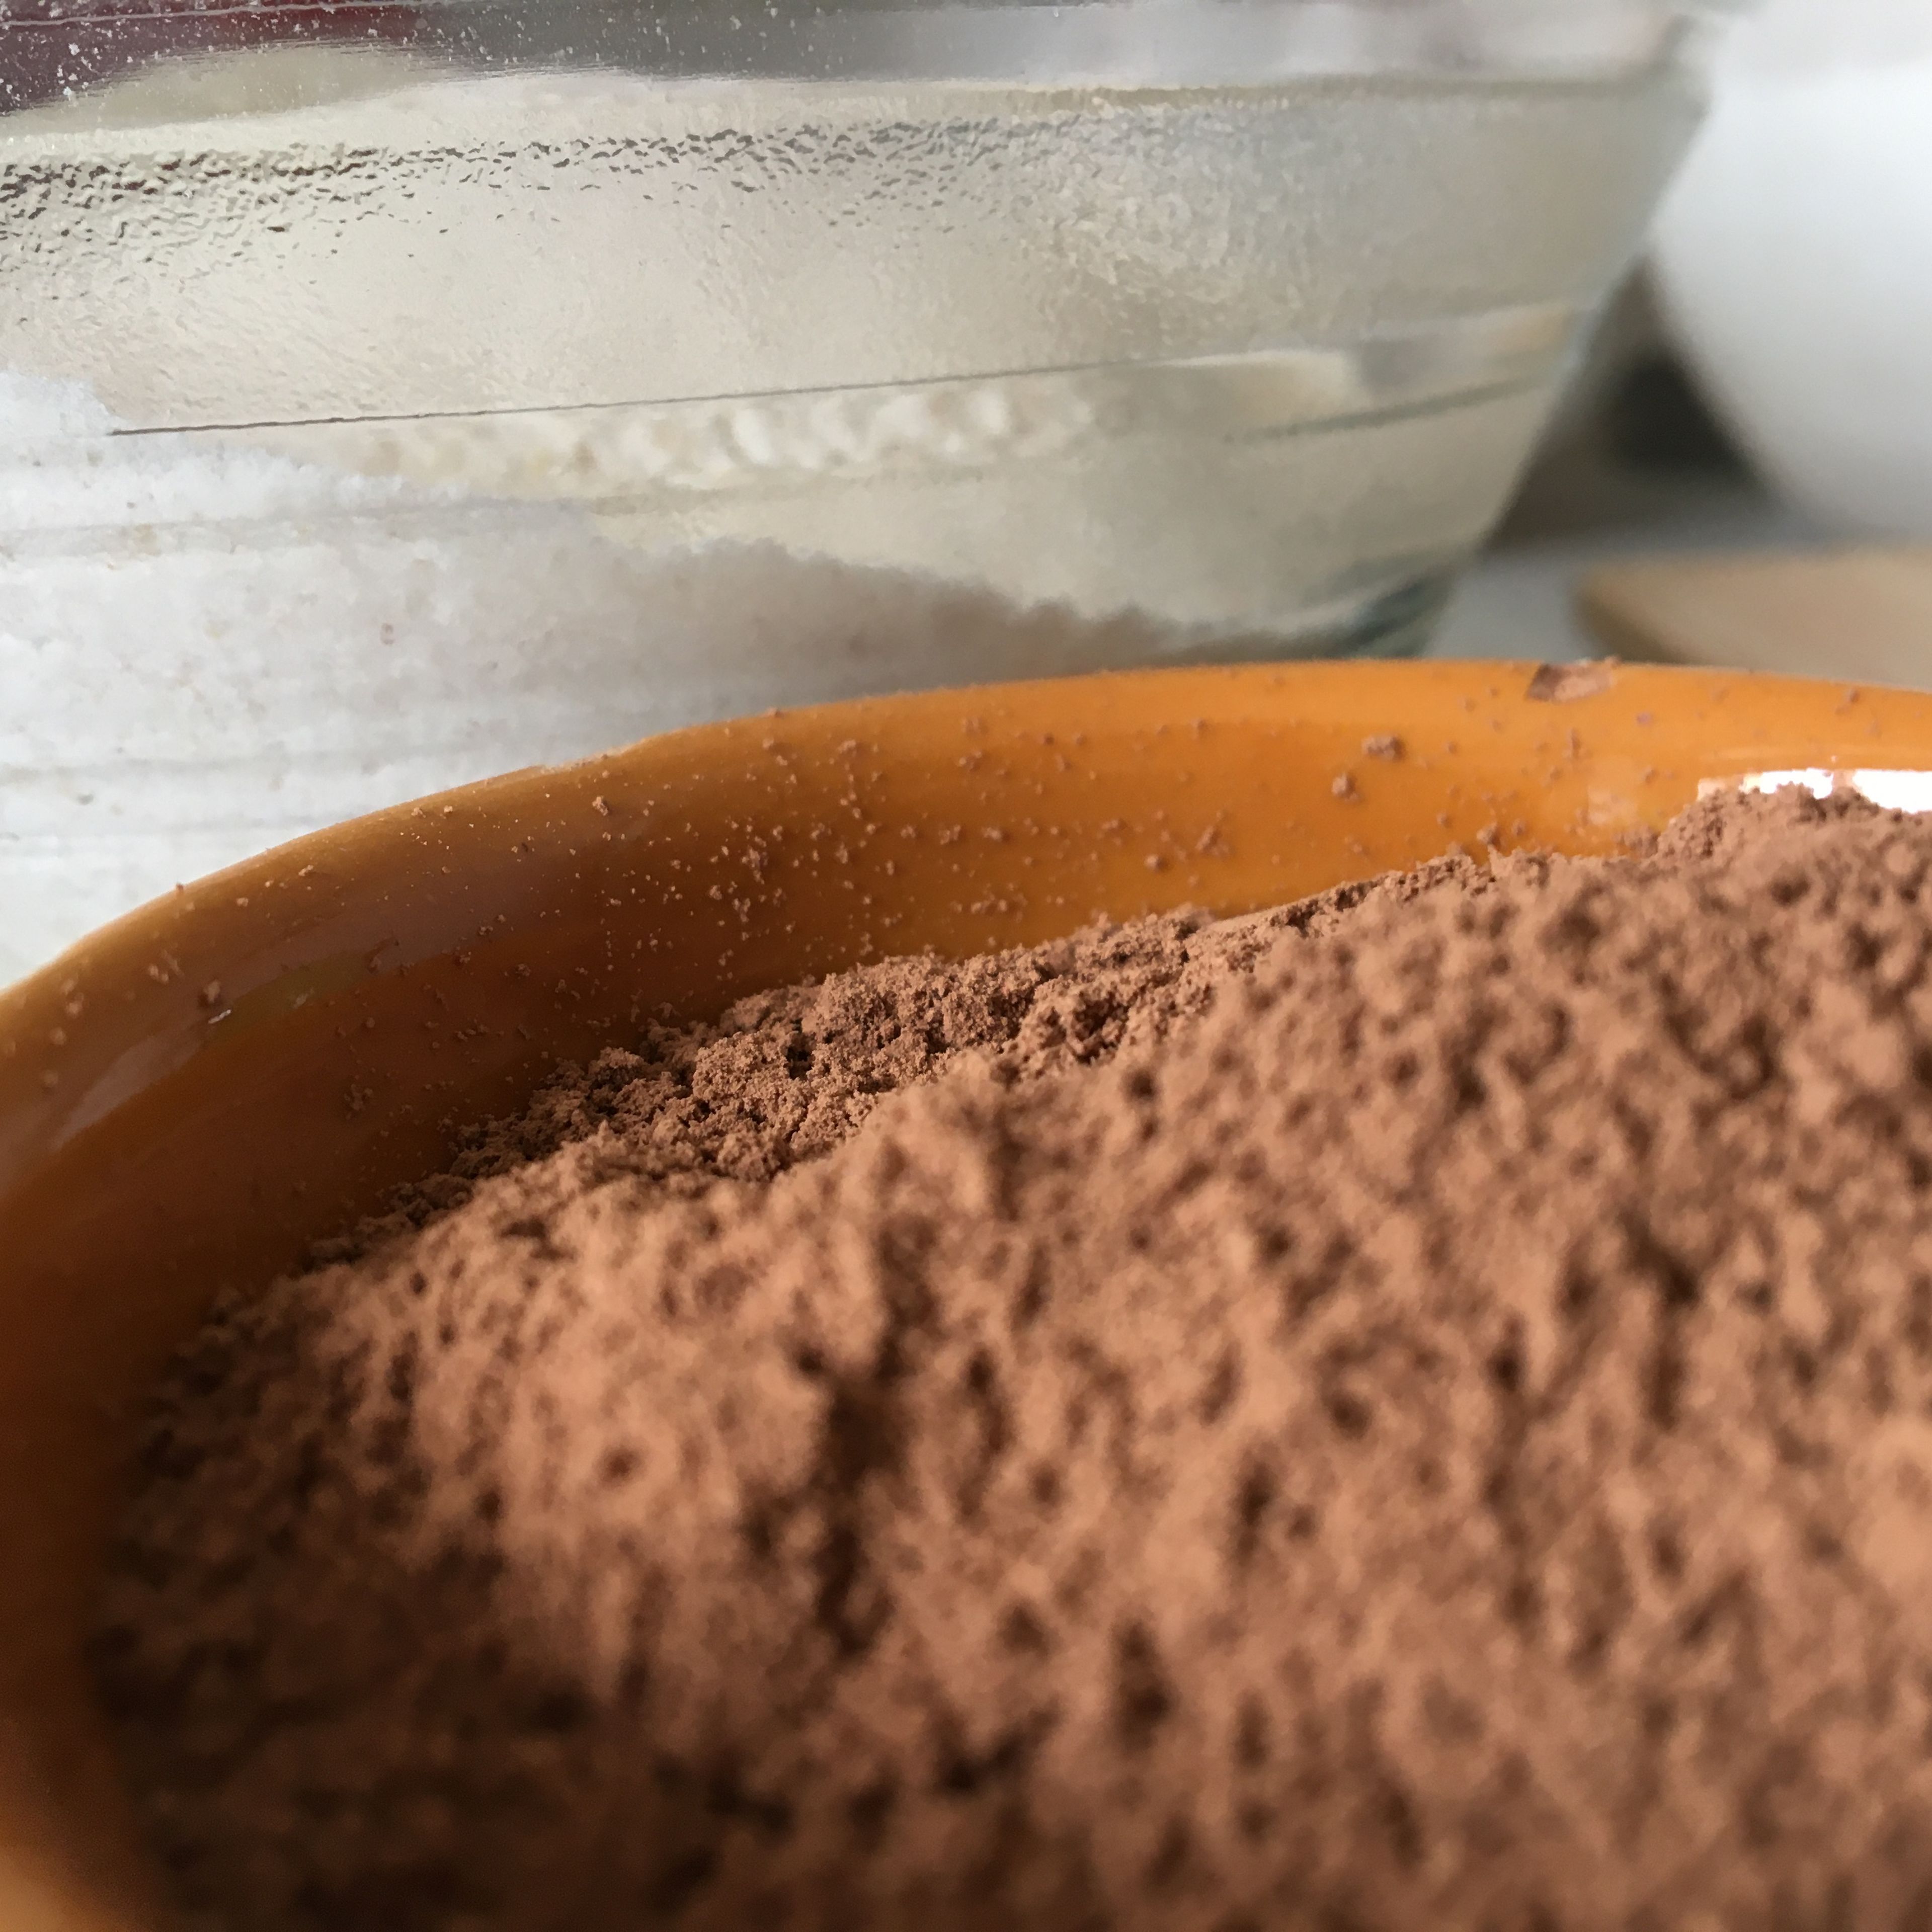 Add the sugar, oil and vanilla extract (if using) and whisk with a hand mixer or stand mixer. Slowly add in the cocoa powder and continue whisking until incorporated.